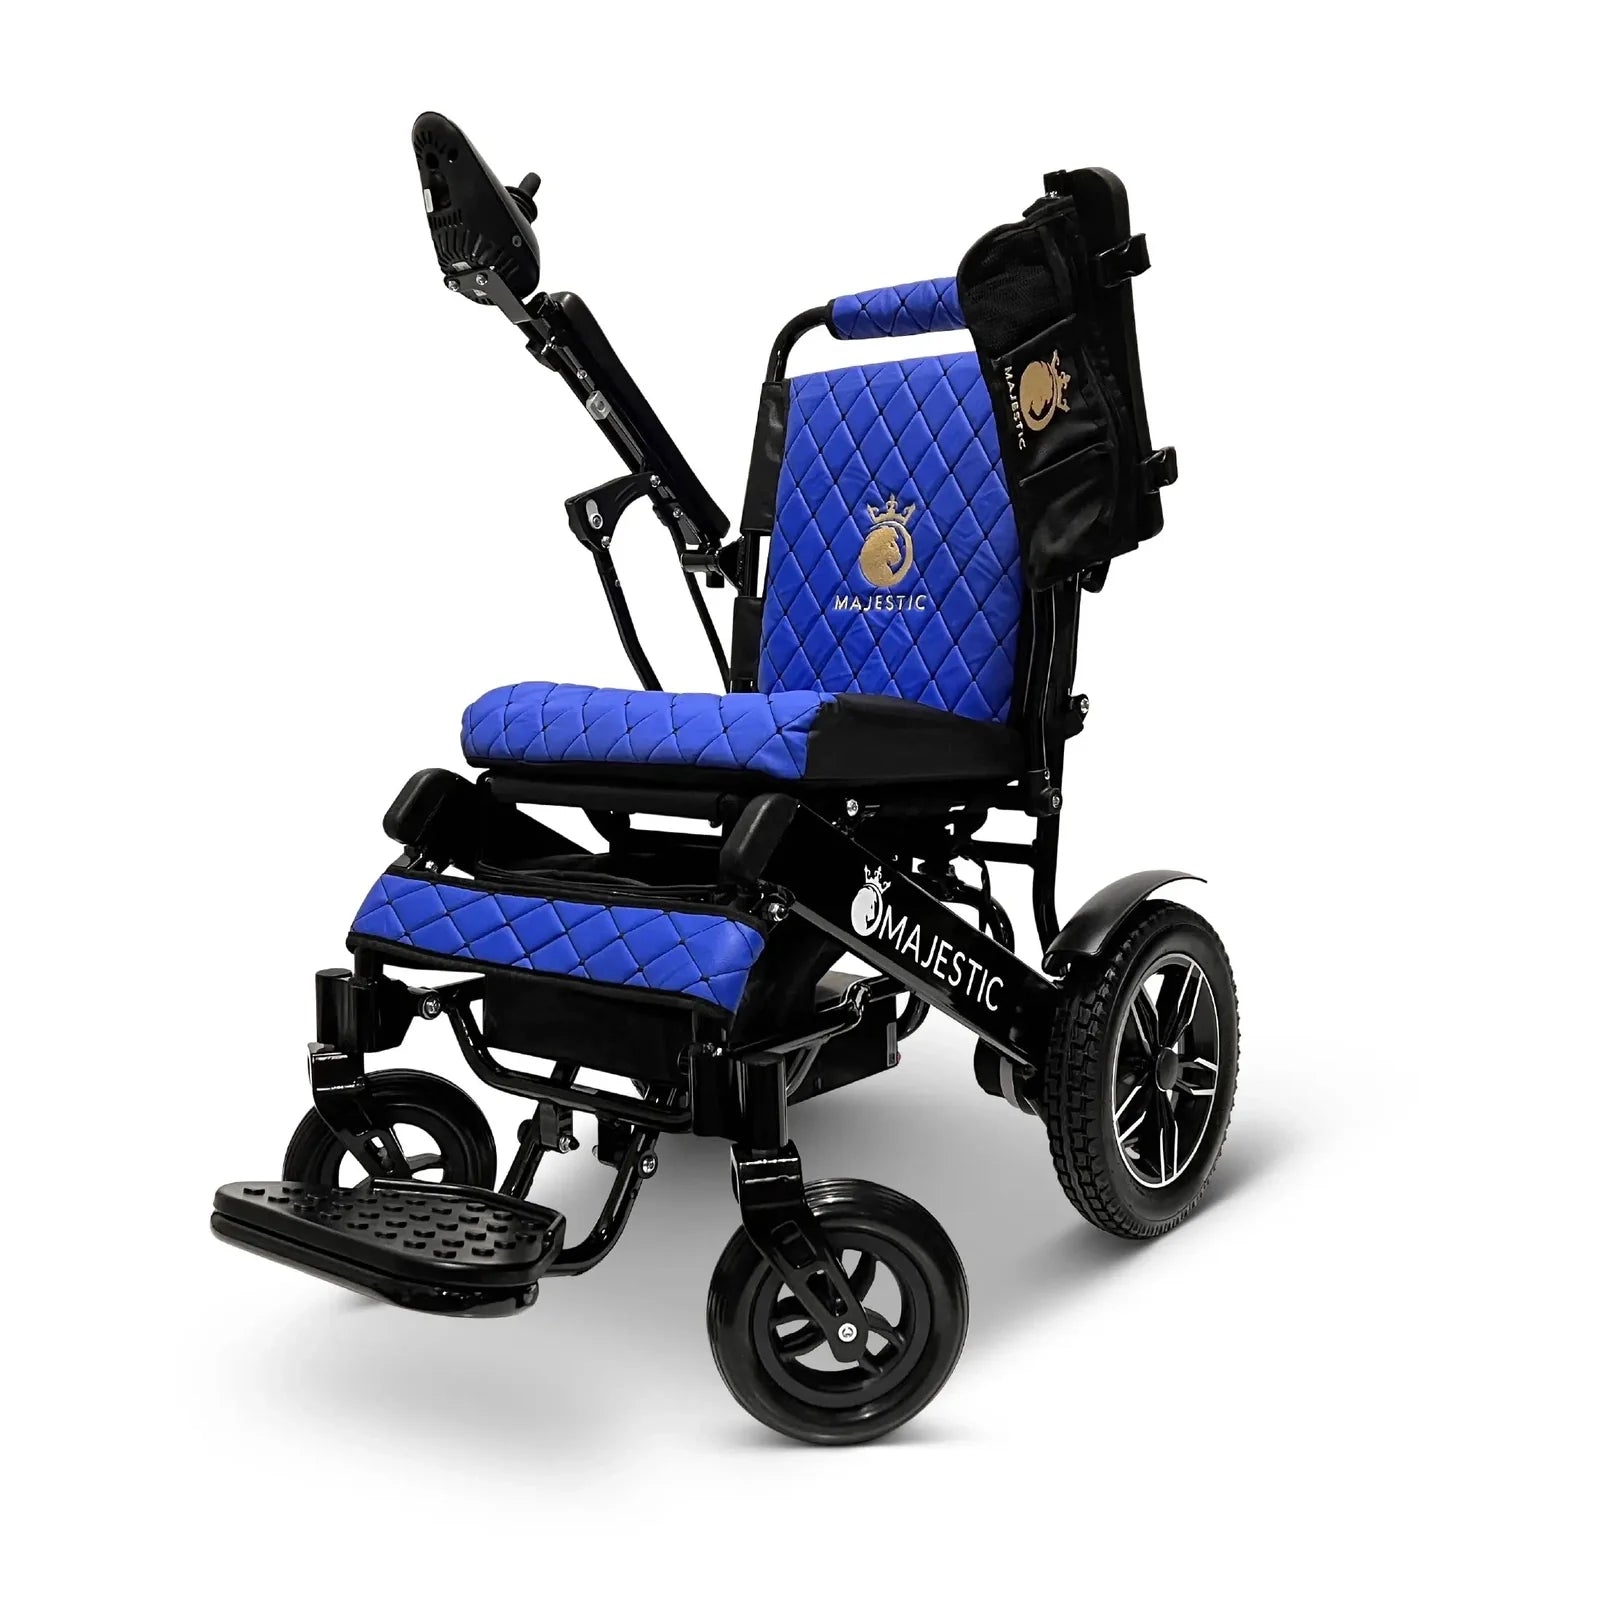 ComfyGO Majestic IQ-8000 Remote Controlled Lightweight Folding Electric Wheelchair Power Wheelchairs ComfyGO Black Blue 10 Miles & 17.5" Seat Width